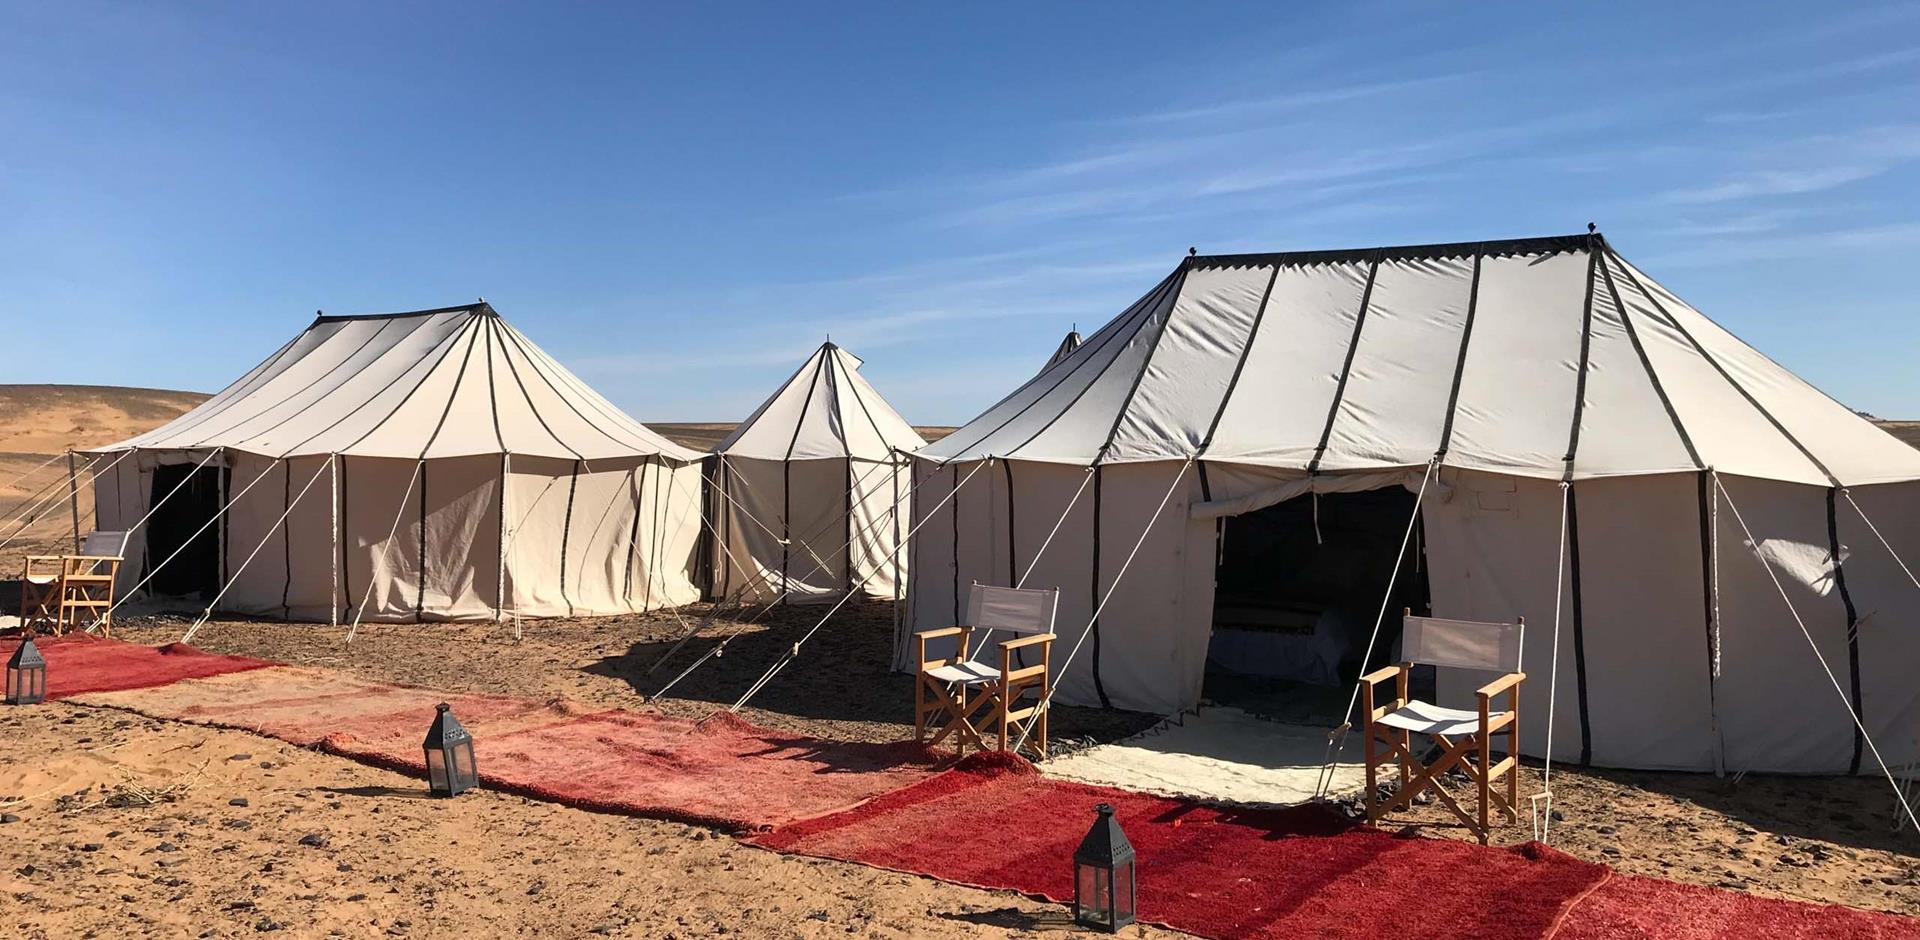 Znagui guest tents, A&K Private Desert Camp, Morocco